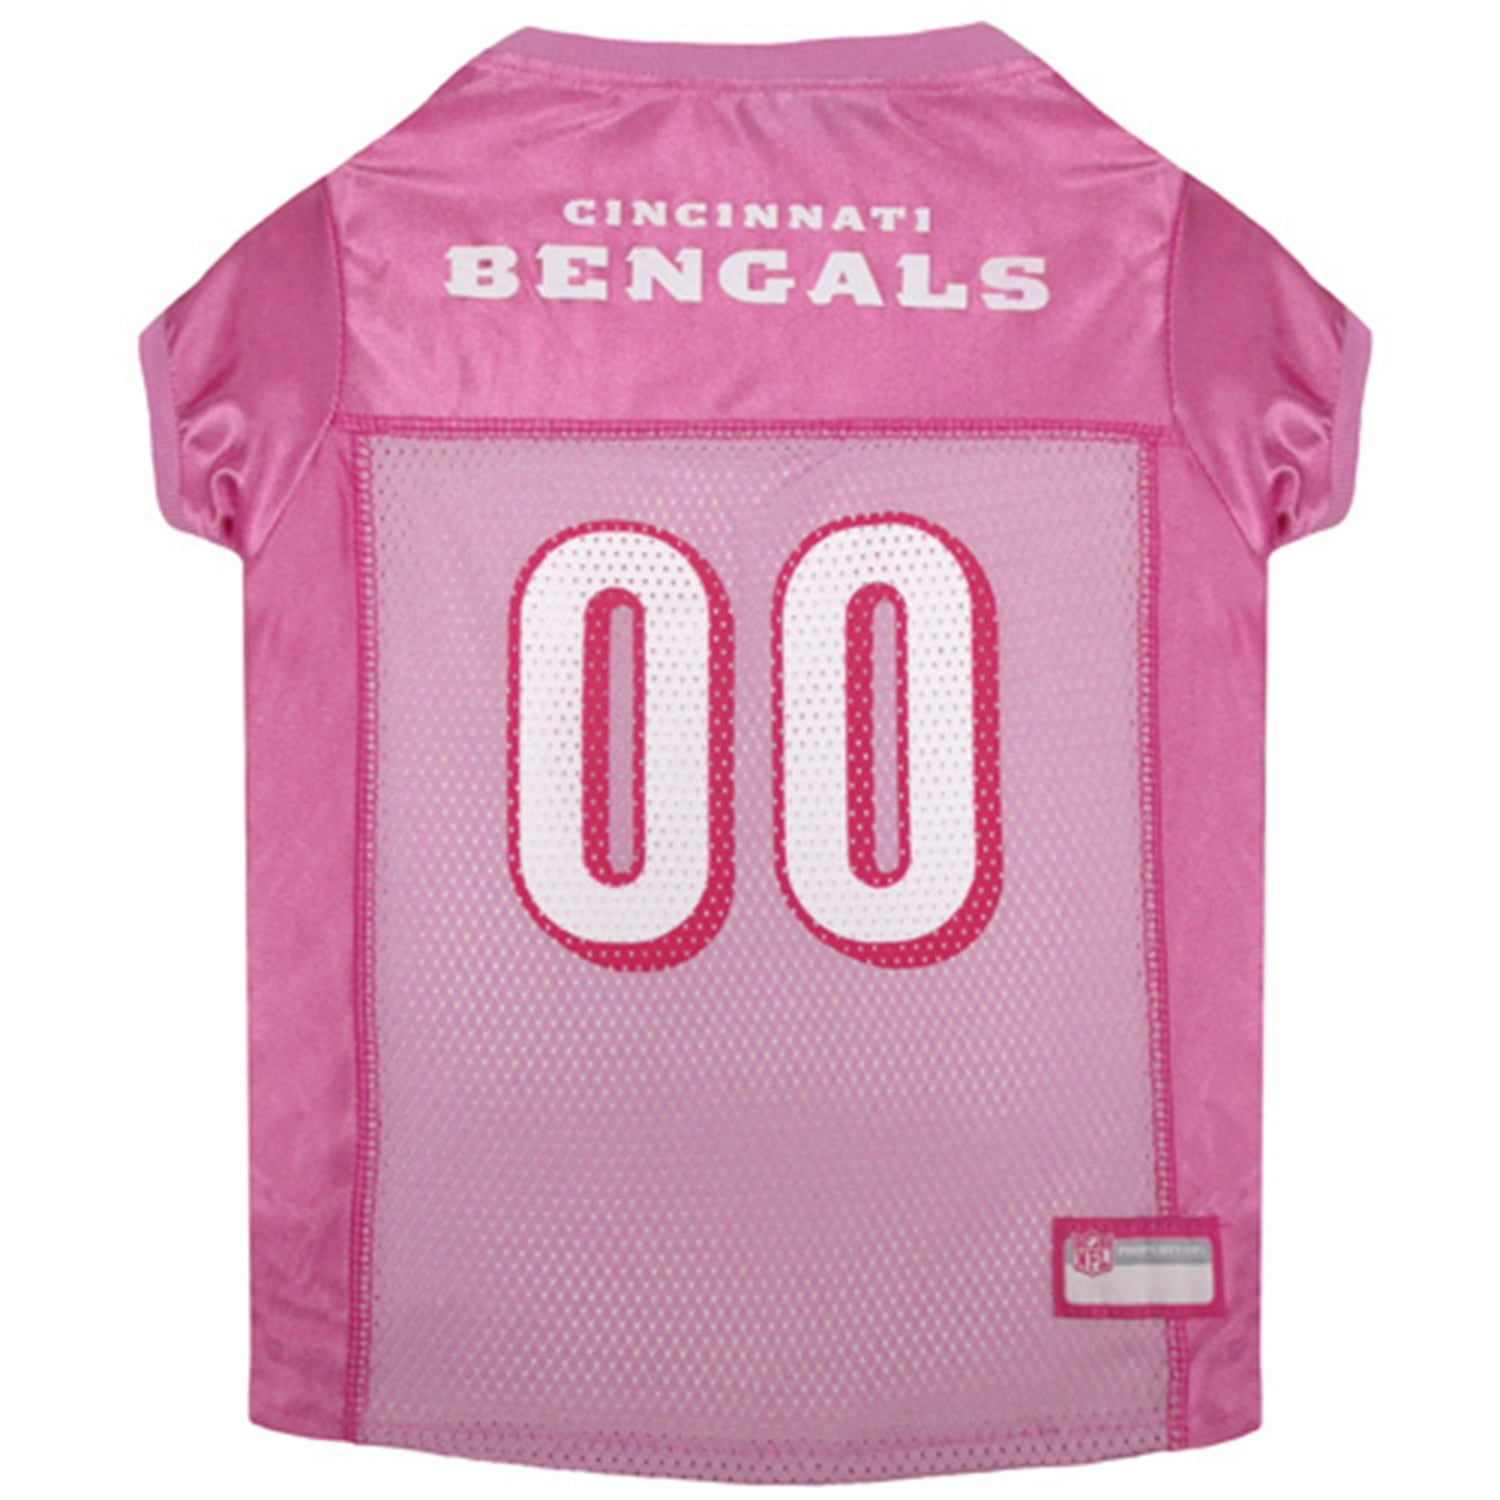 bengals jersey small